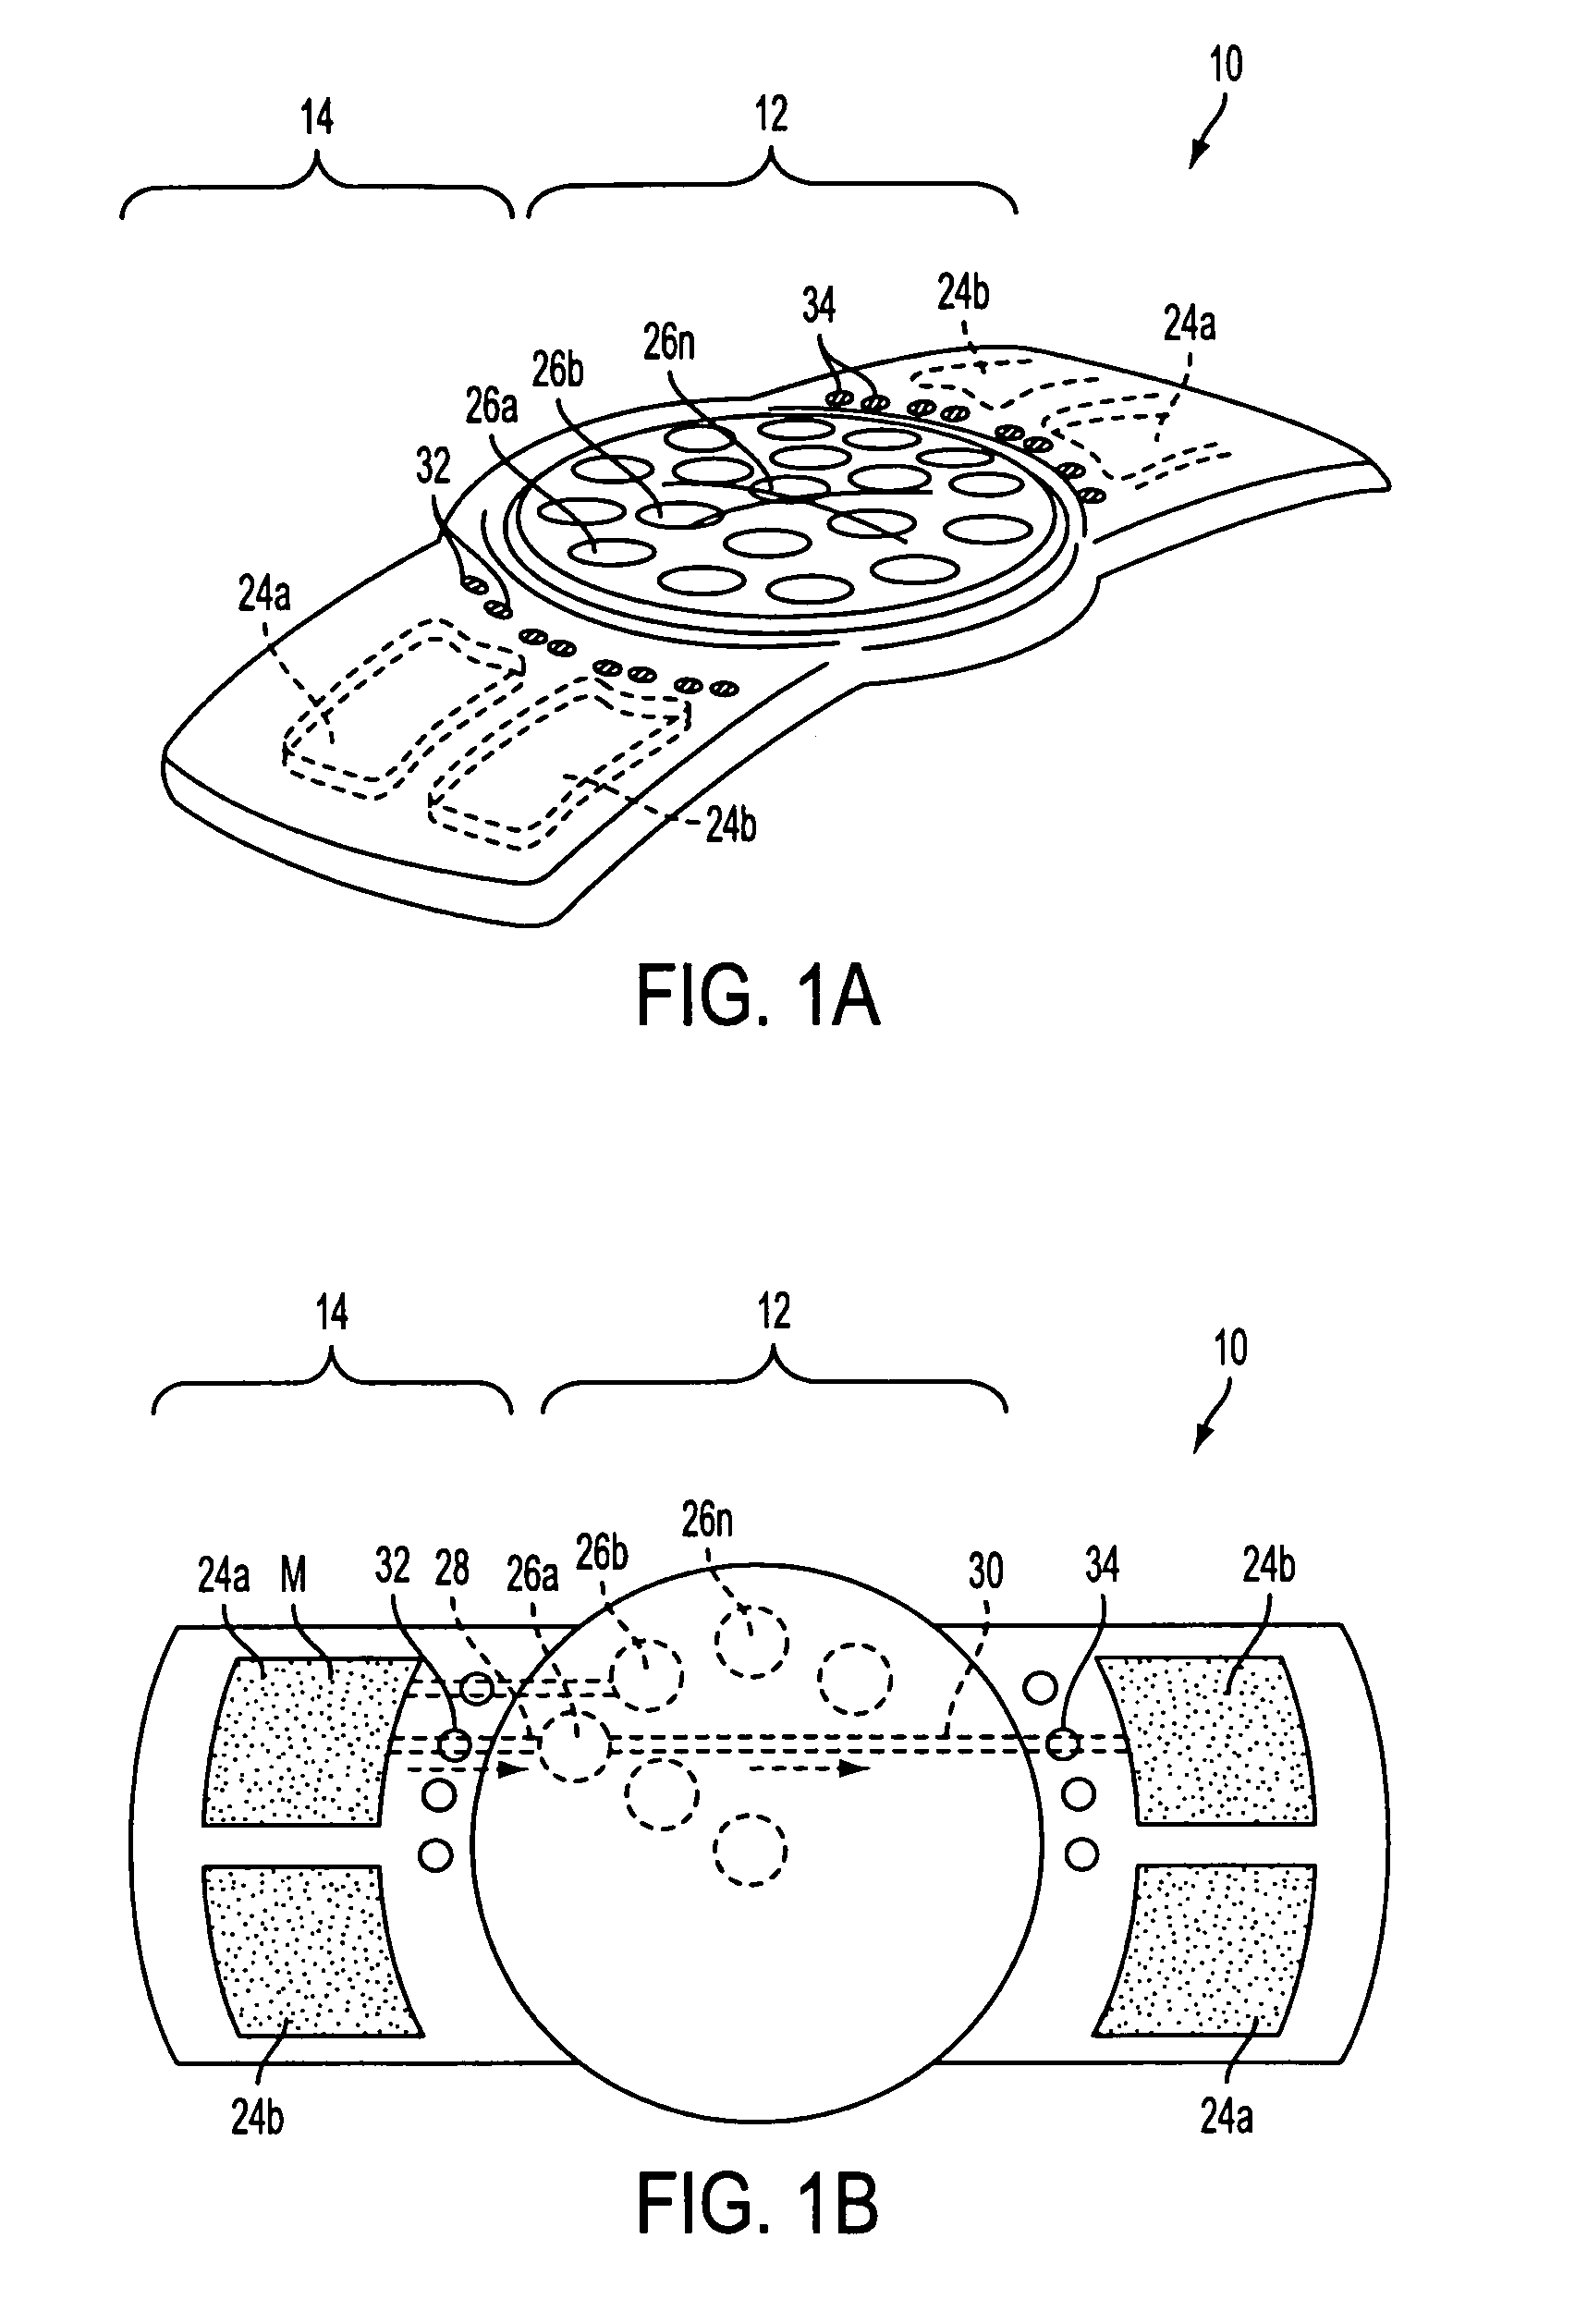 Lens system and method for power adjustment using externally actuated micropumps